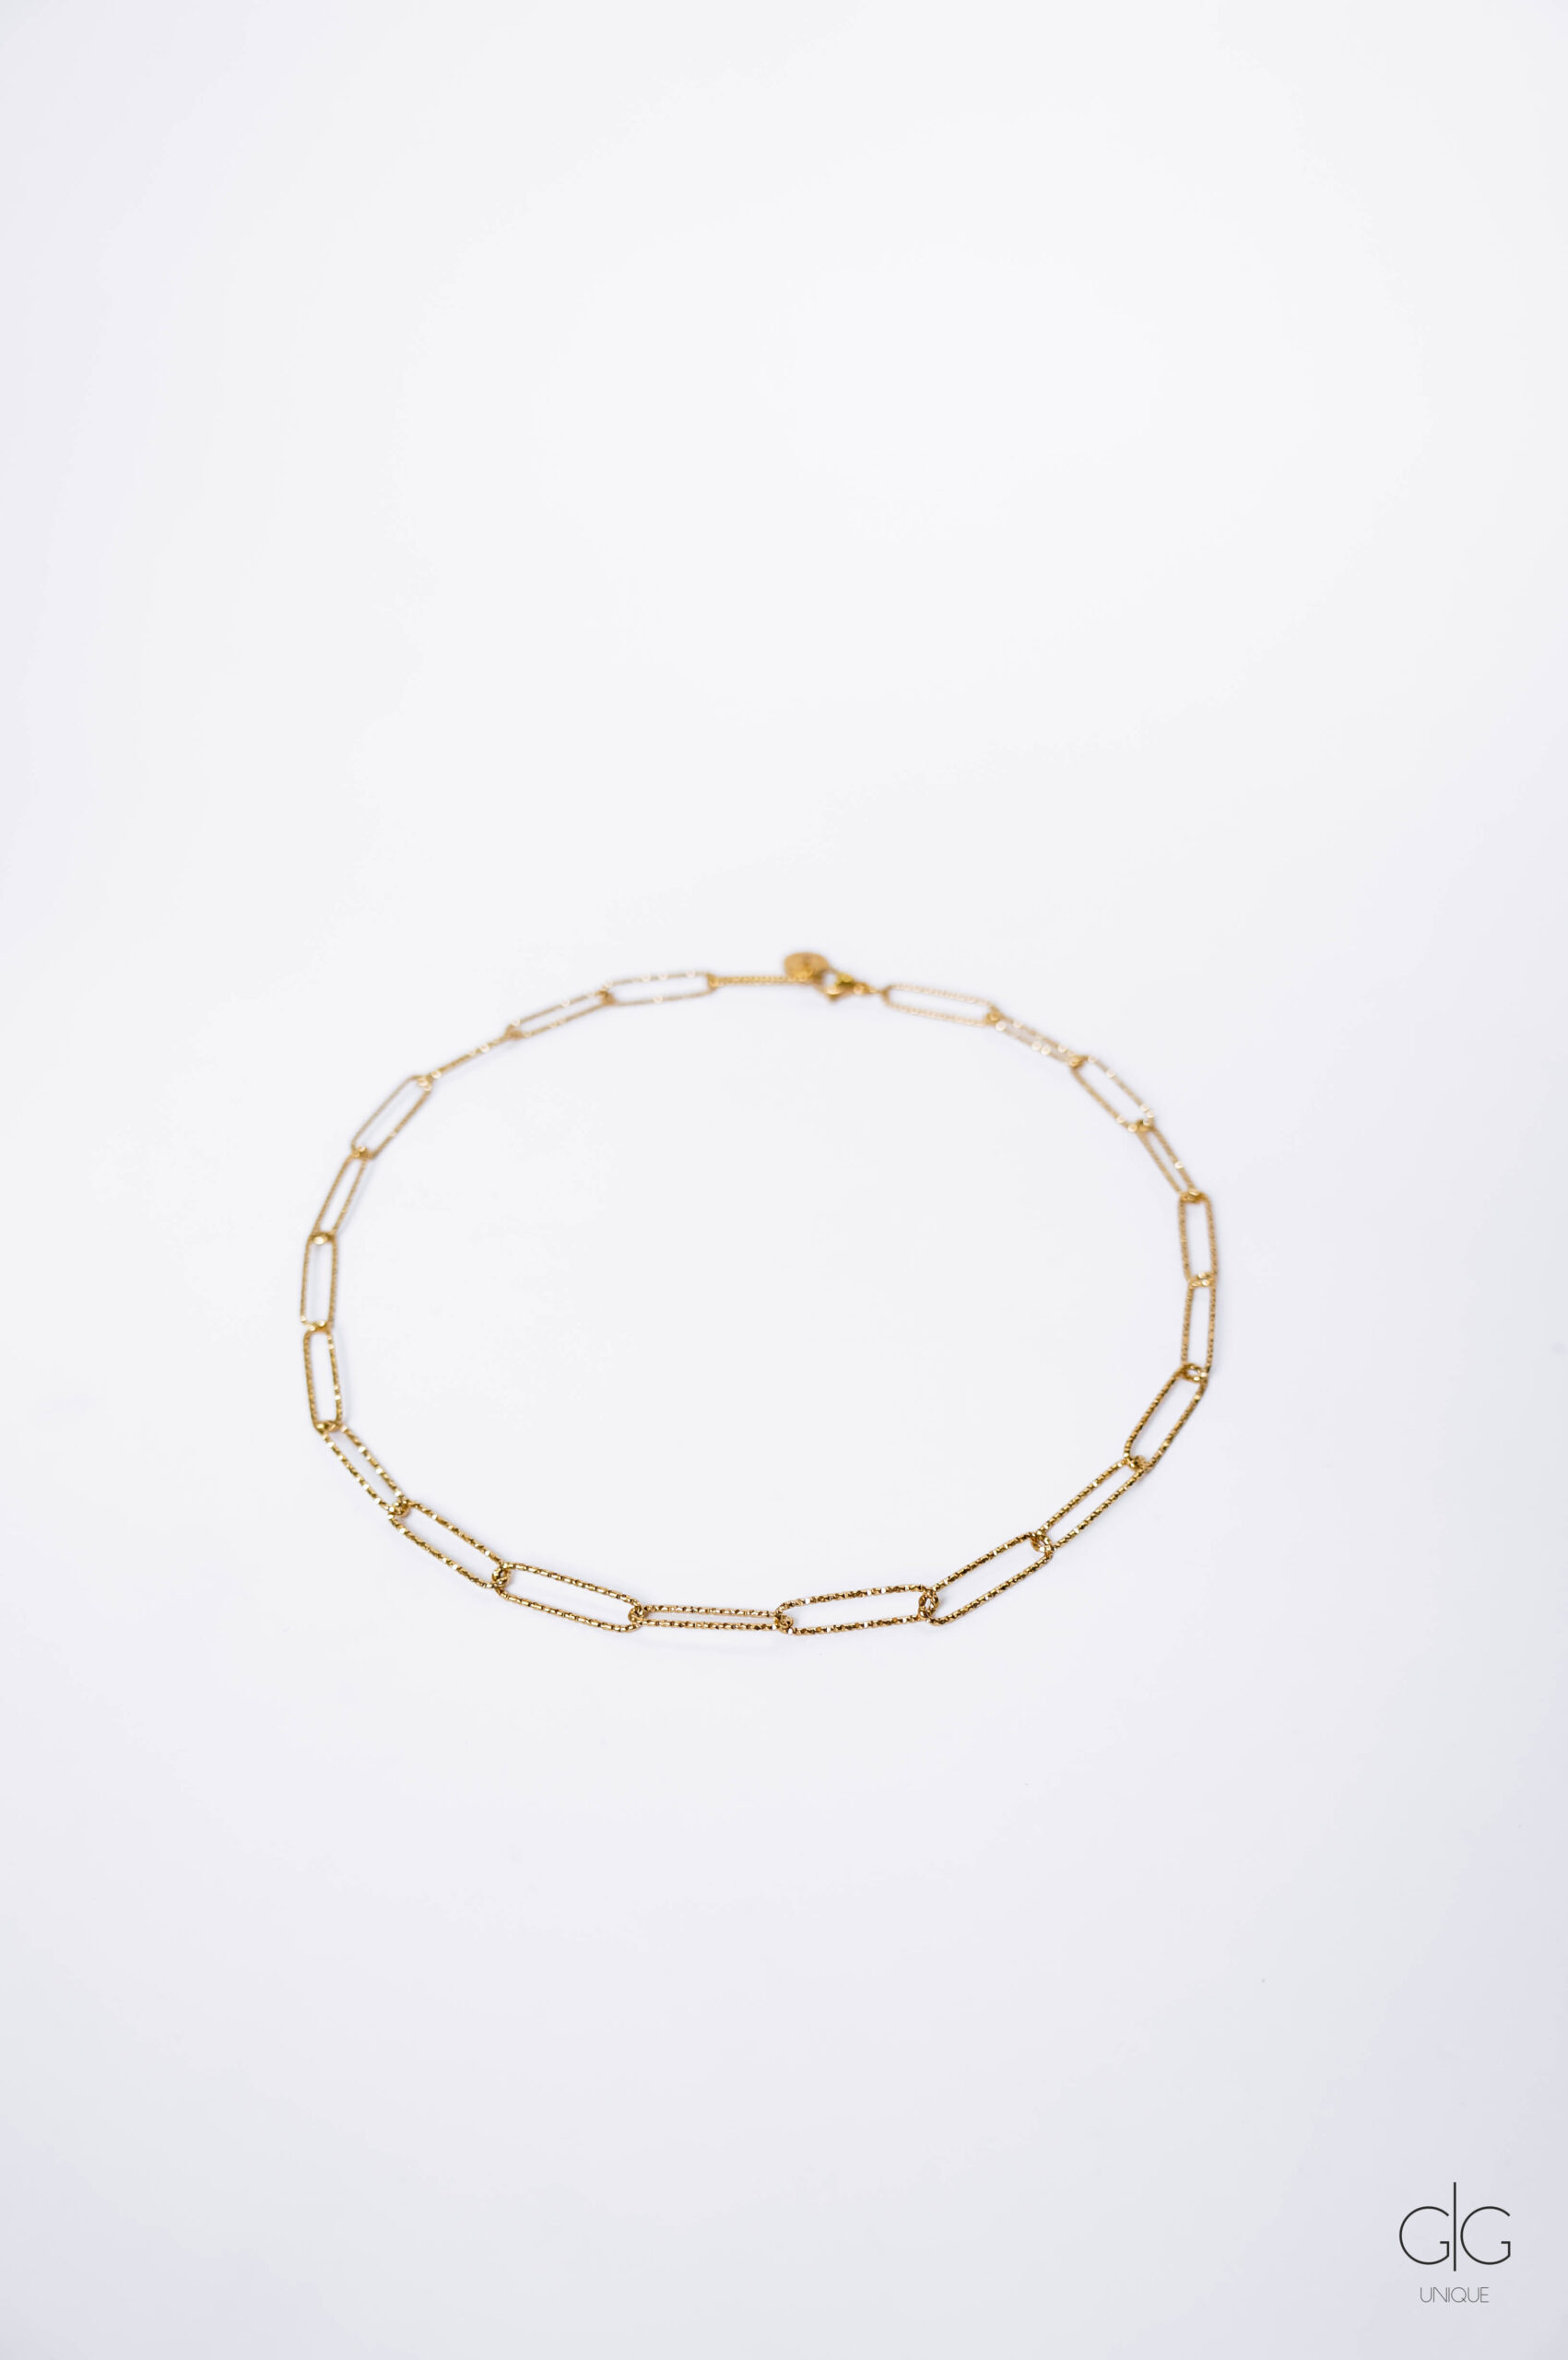 Shiny gold-plated chain necklace - GG UNIQUE